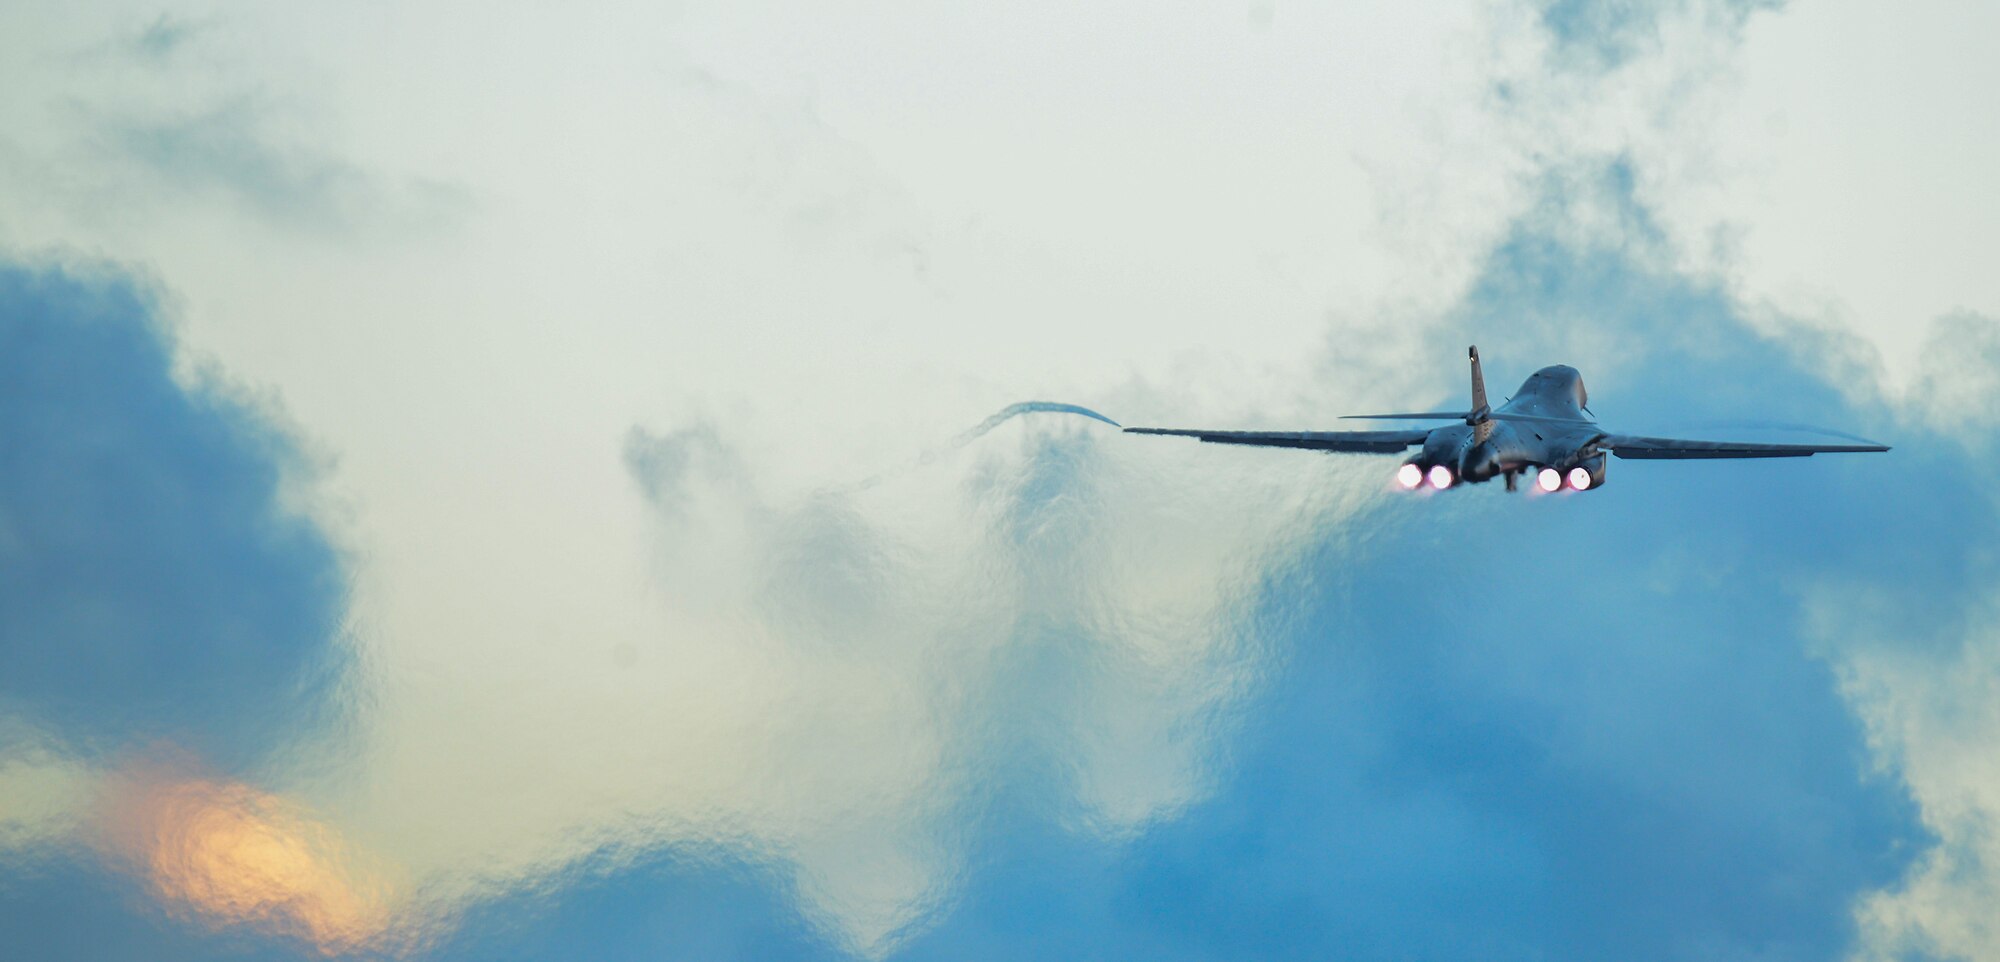 A U.S. Air Force B-1B Lancer assigned to the 34th Expeditionary Bomb Squadron, deployed from Ellsworth Air Force Base (AFB), S.D., takes off Oct. 25, 2016, at Andersen AFB, Guam. The aircraft is deployed in support of the U.S. Pacific Command’s Continuous Bomber Presence operations. (U.S. Air Force photo by Senior Airman Arielle Vasquez/Released)
